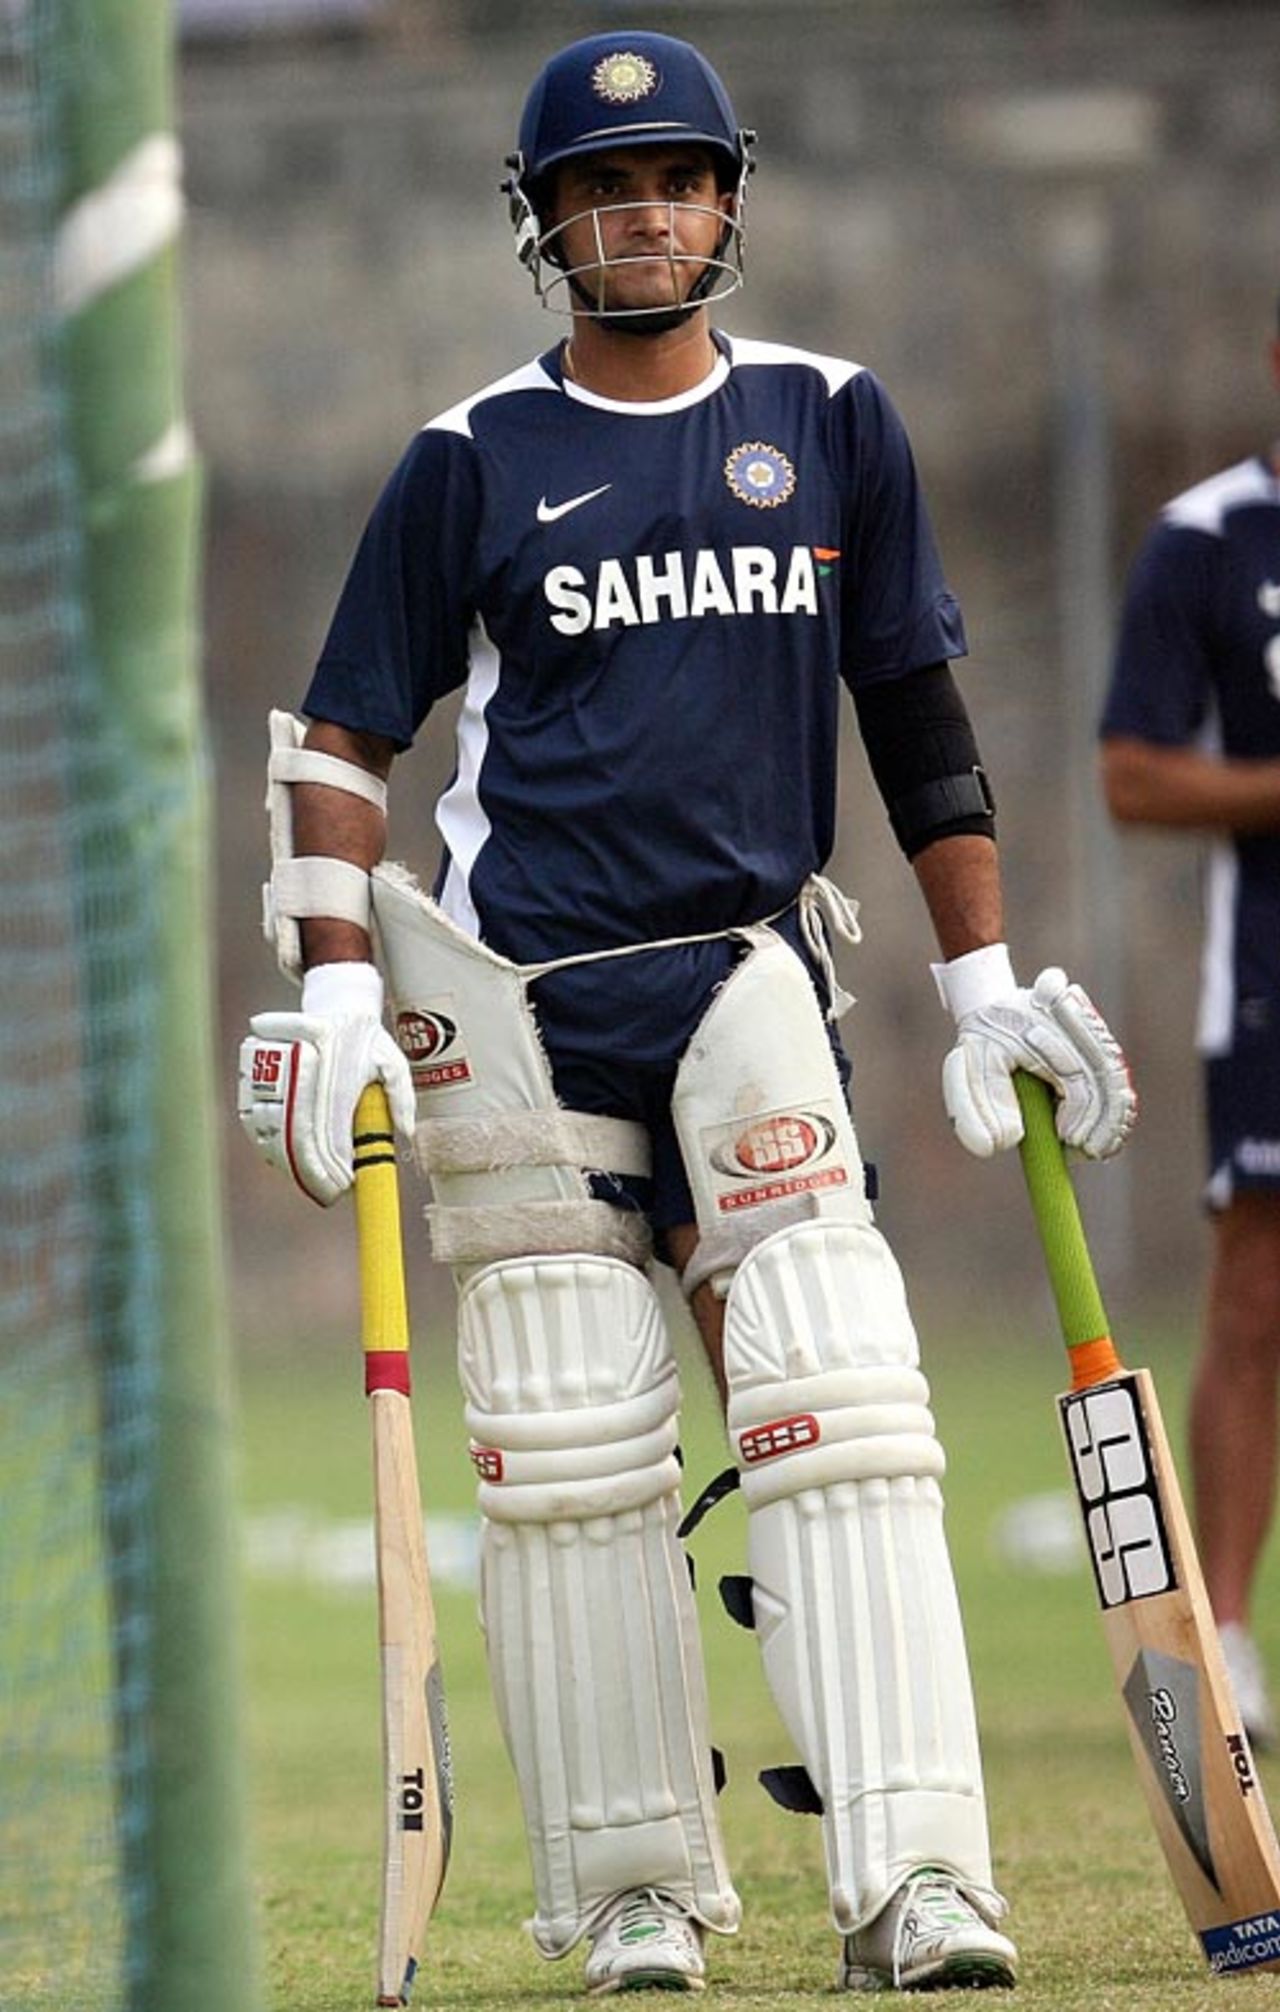 Sourav Ganguly waits for his turn to bat at the nets, Delhi, October 26, 2008